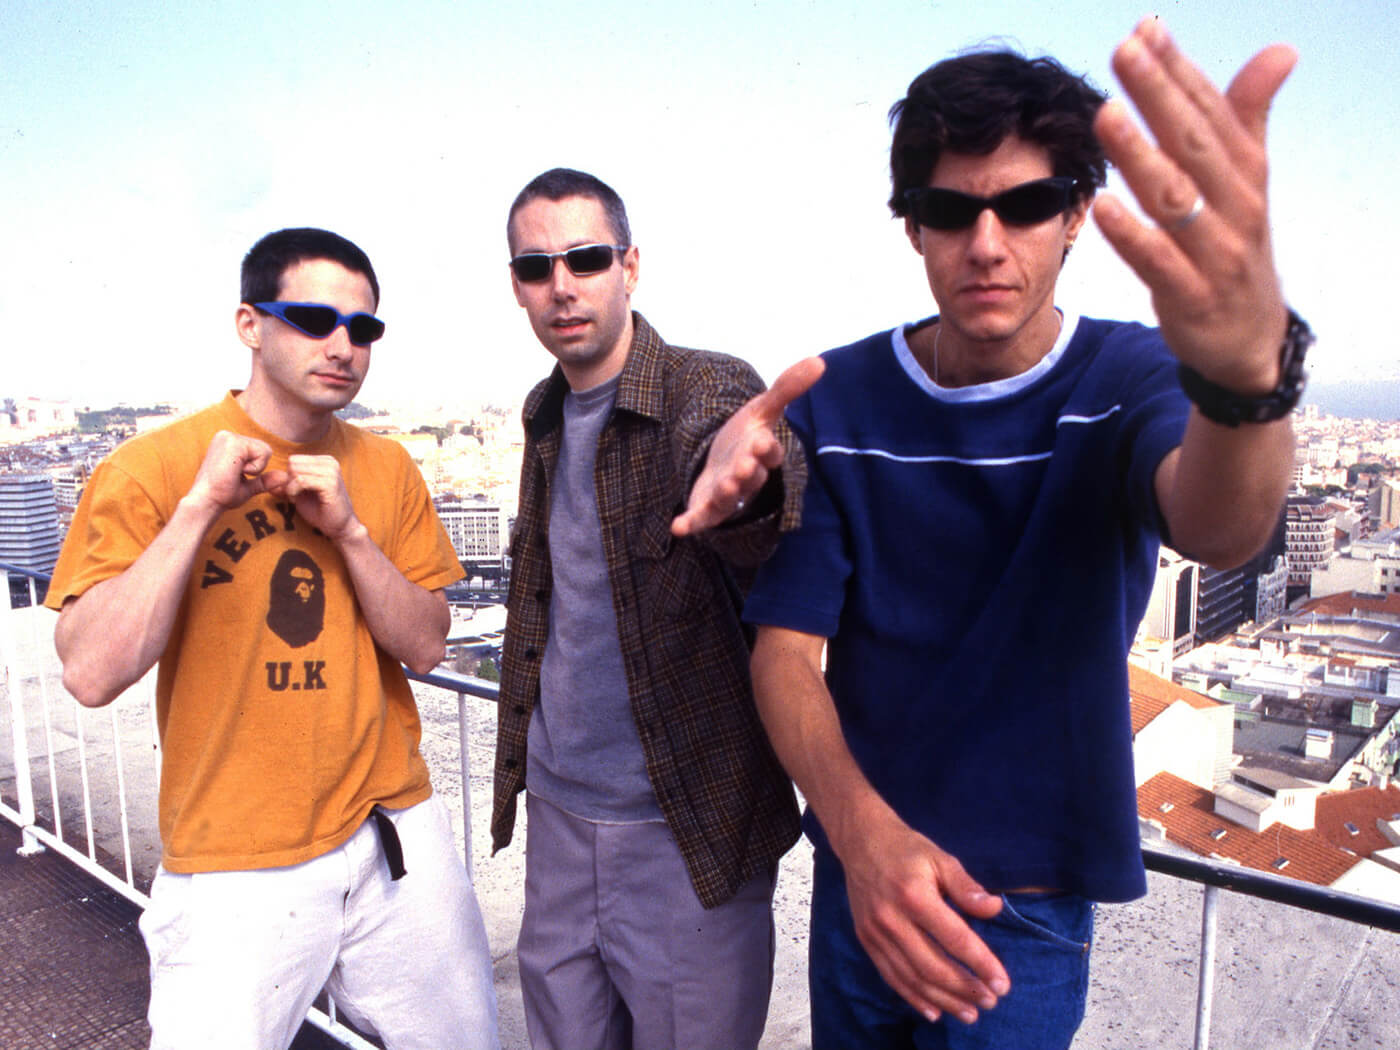 Beastie Boys’ Check Your Head to get 30th anniversary reissue